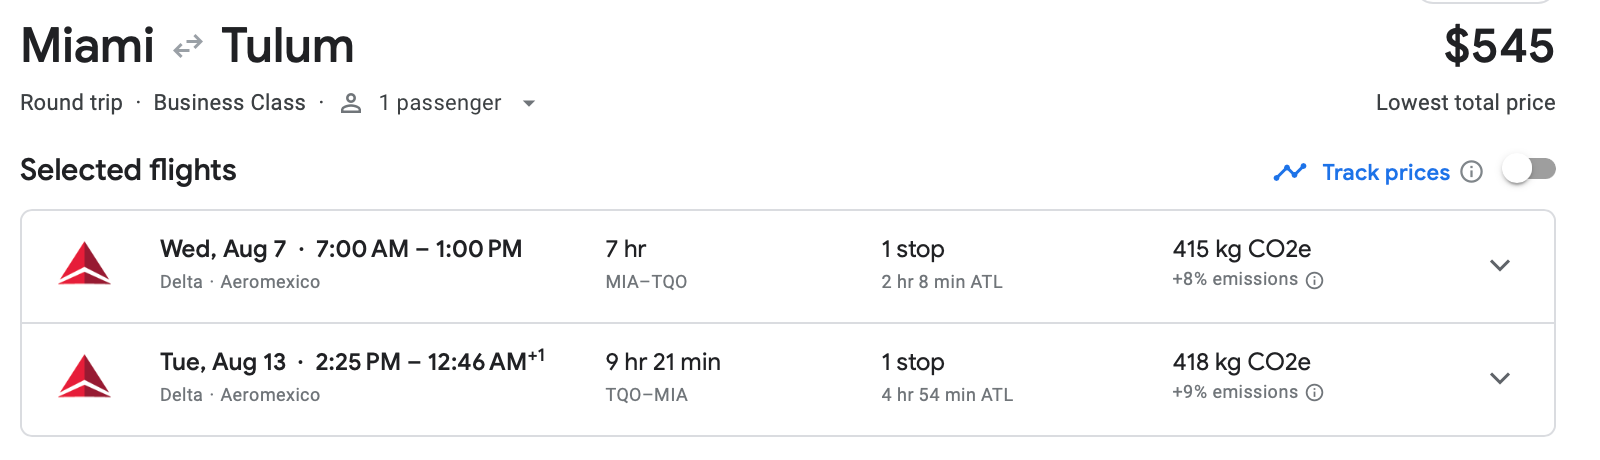 A screenshot of the Google Flights estimate for a round-trip, business class flight from Miami to Tulum.